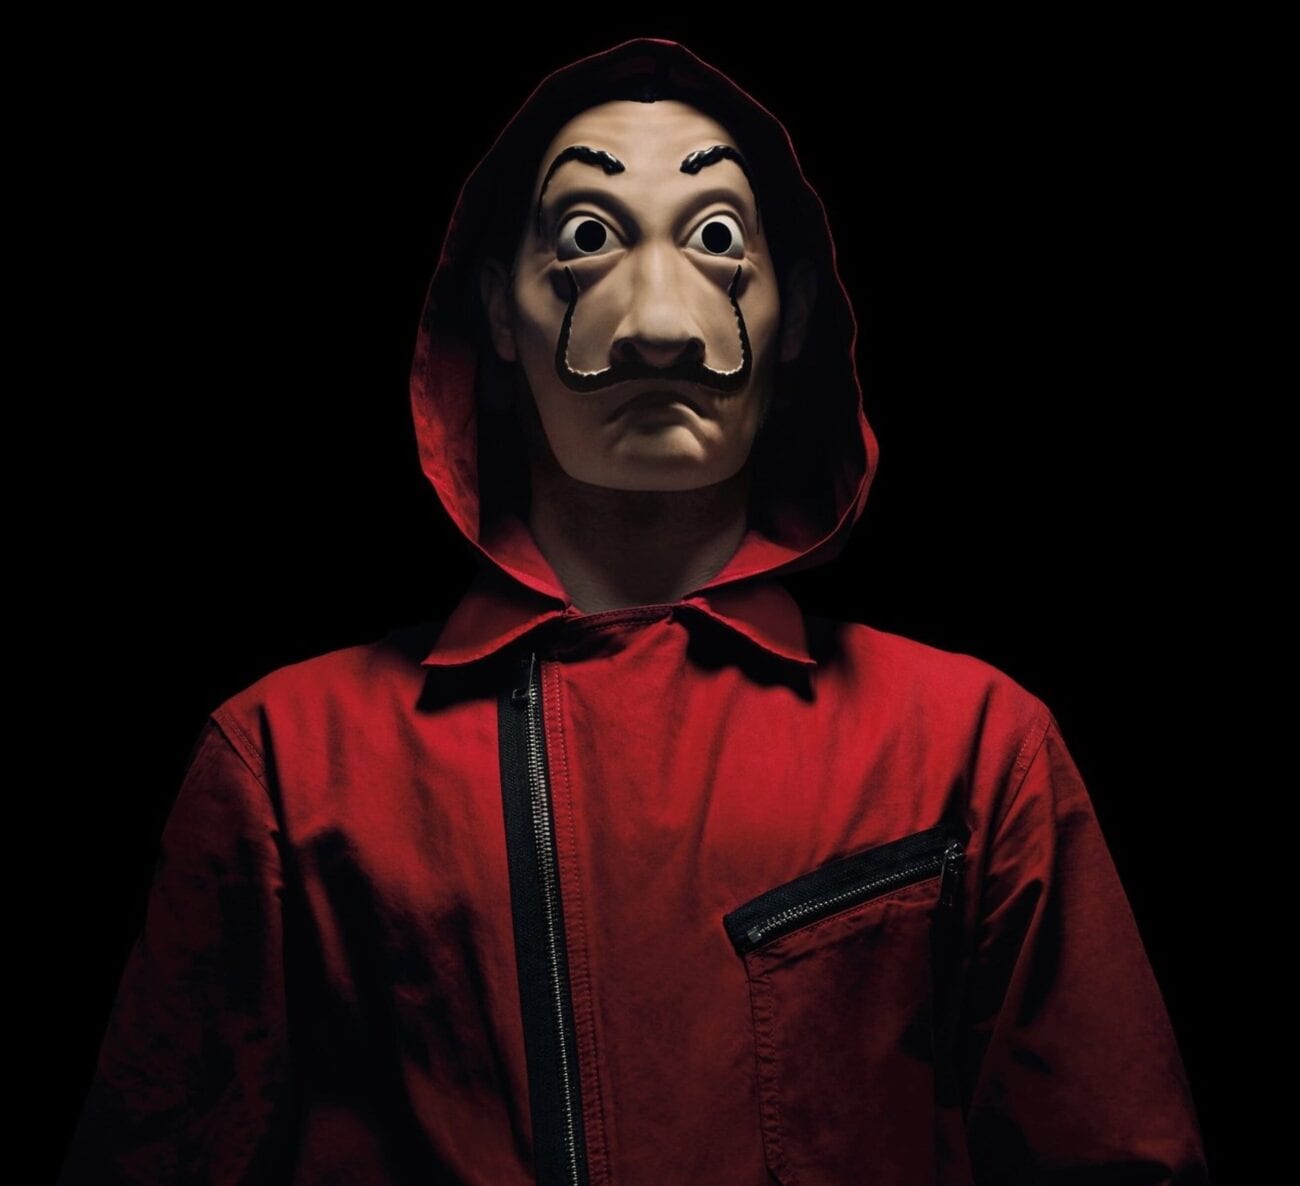 'Money Heist' part 5 is finally upon us. Crack the code and find out if The Professor will escape in the latest installment from the hit series.